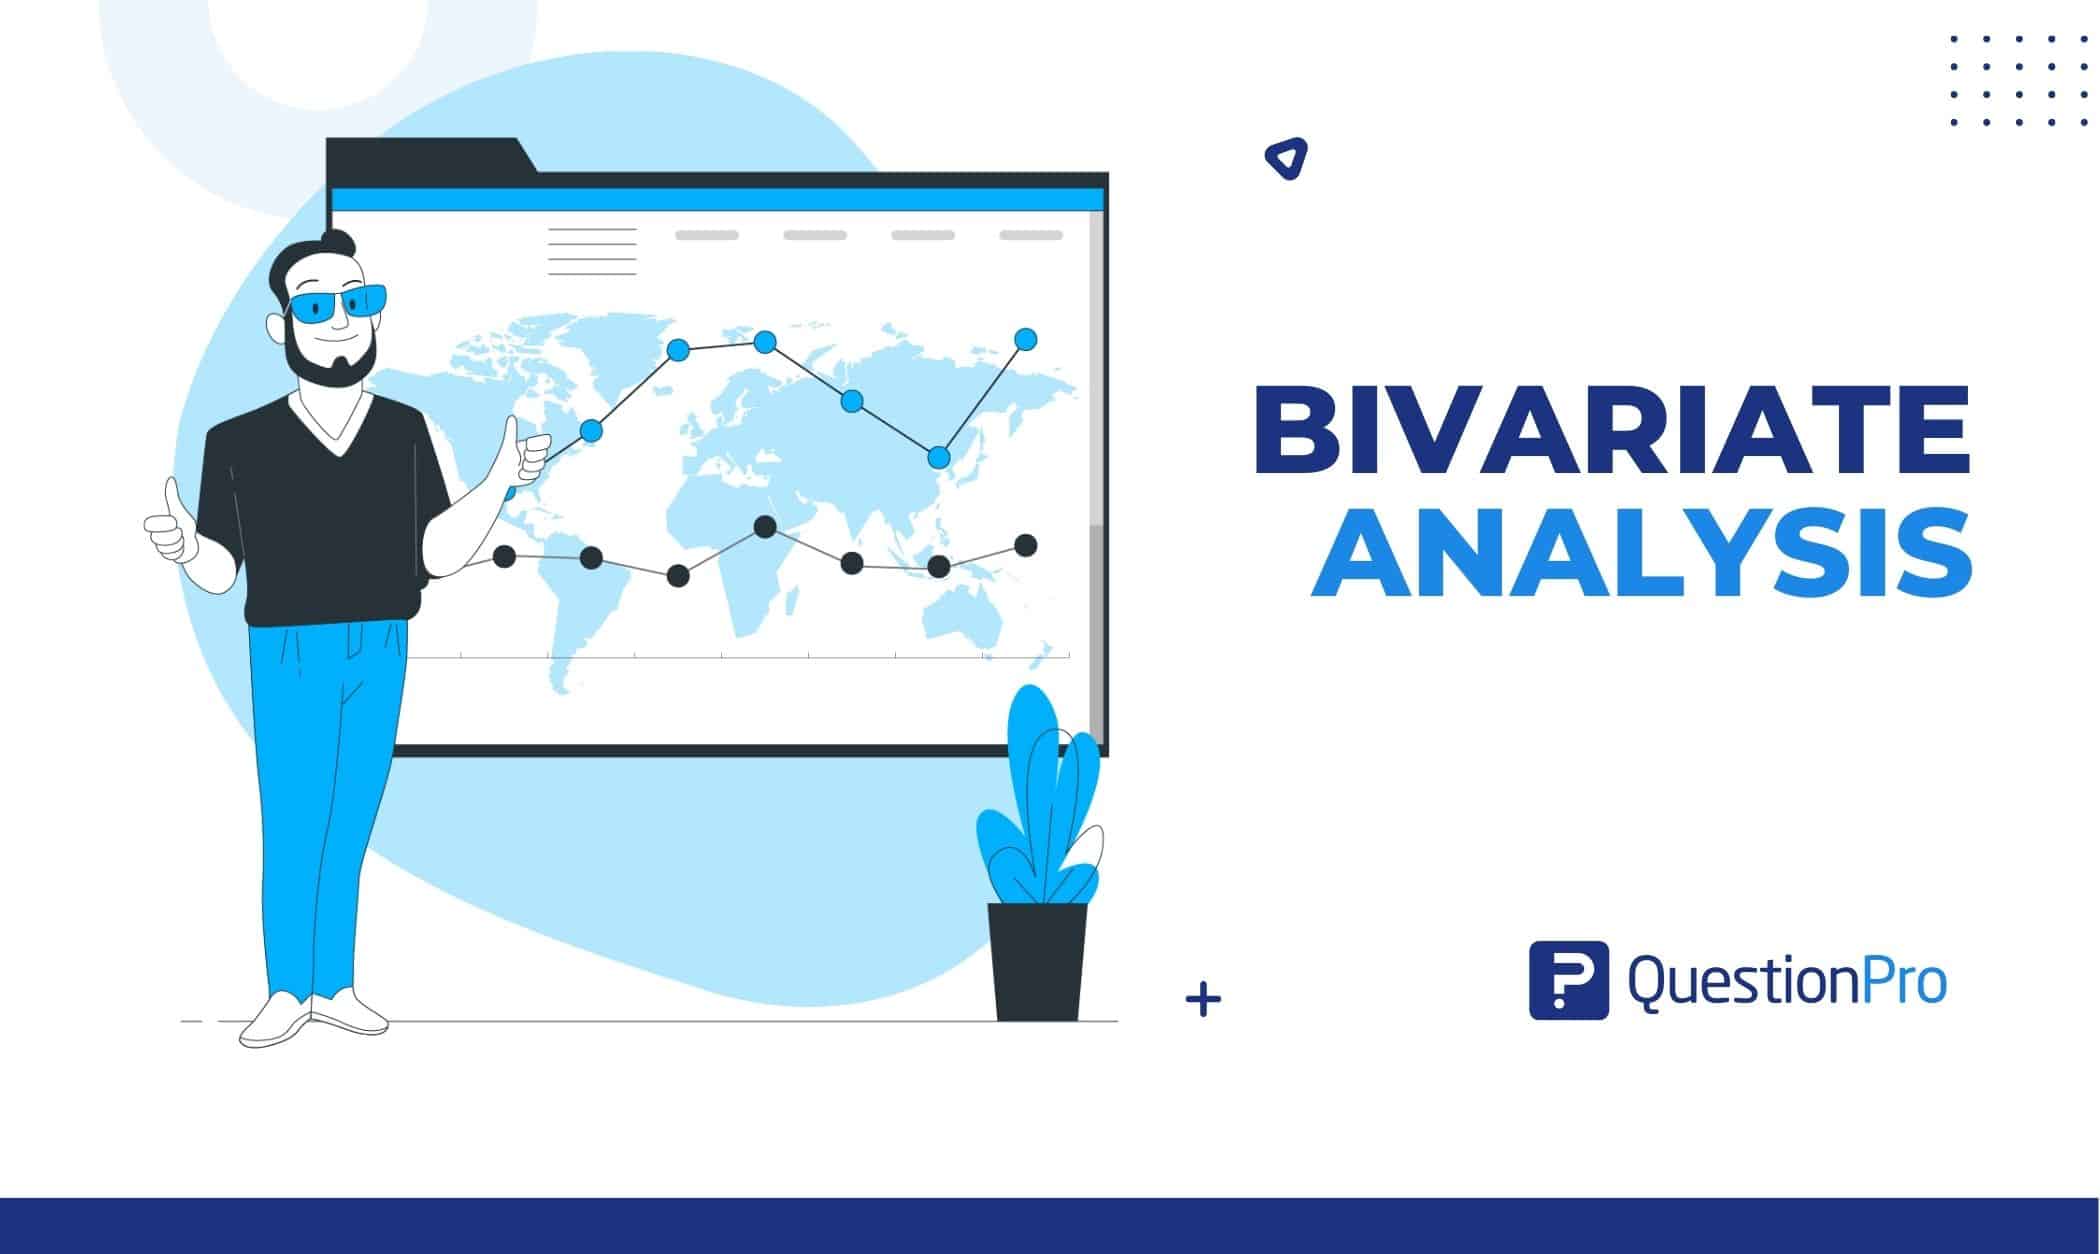 Bivariate analysis is one type of quantitative analysis. It determines where two variables are related. Learn more in this article.